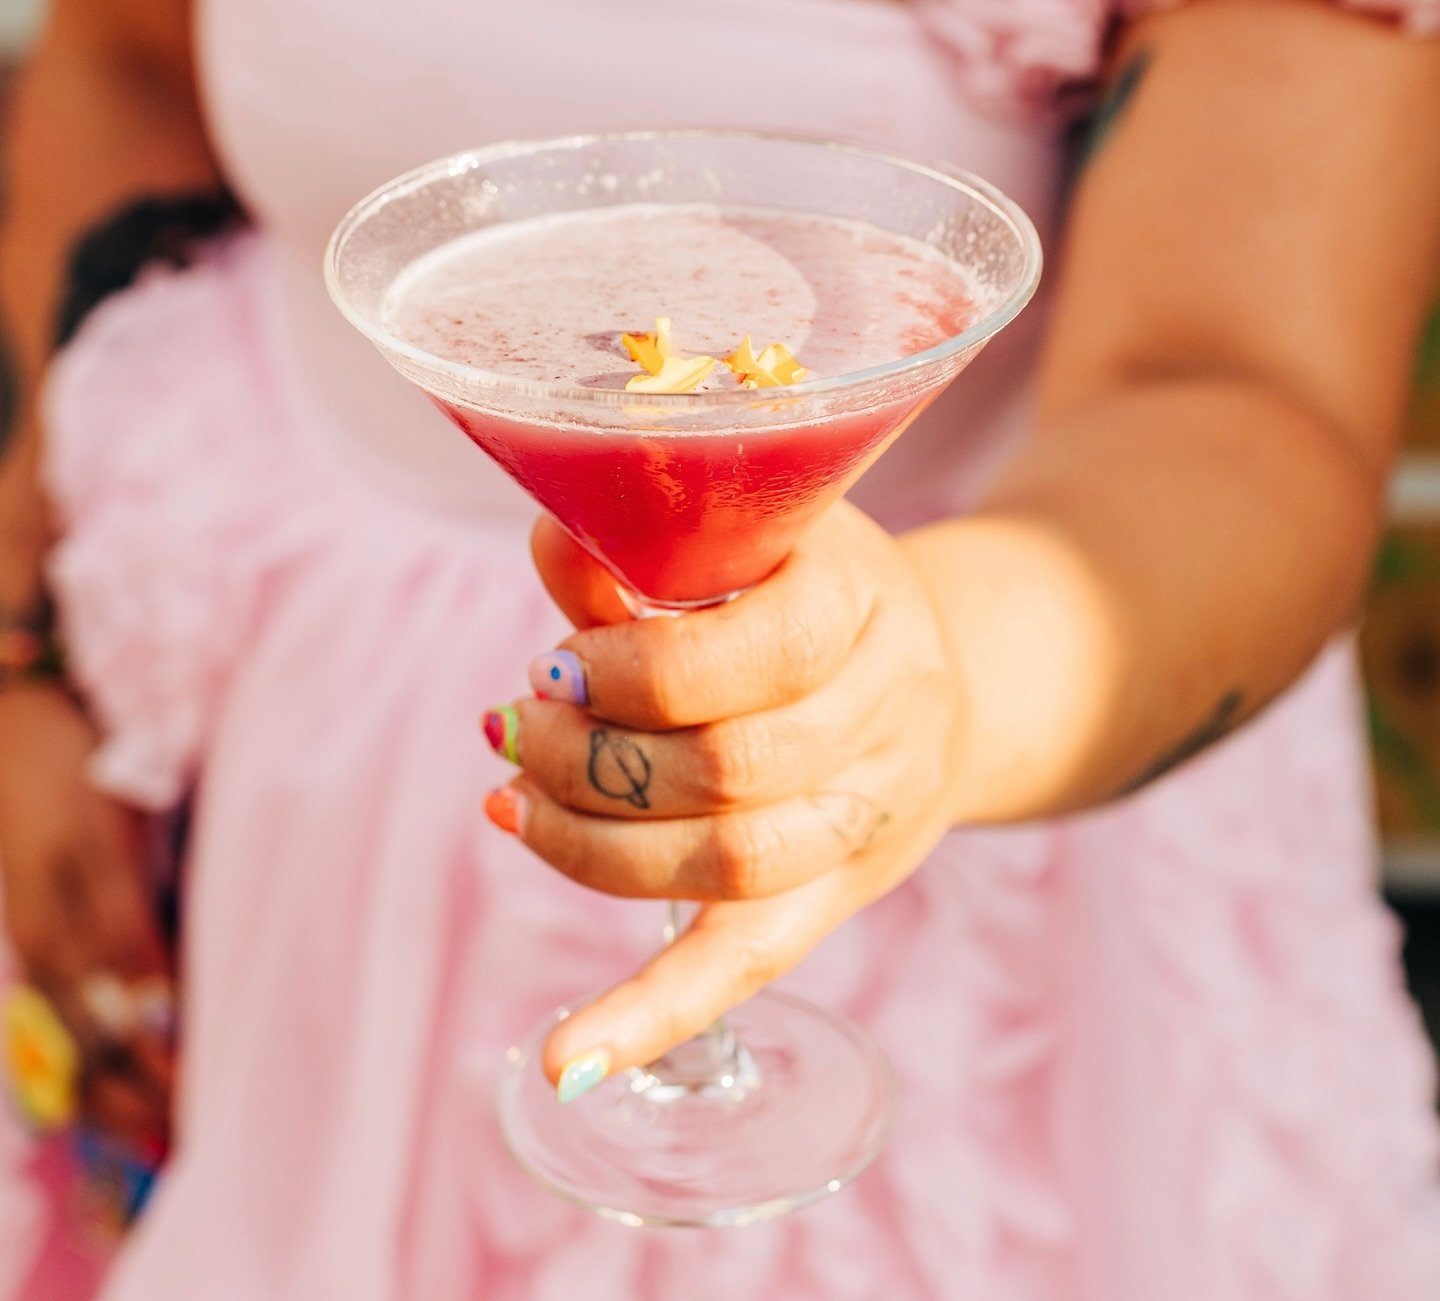 Cheers to Friday! Featuring this Malibu Barbie cocktail from our Barbiecore farm dinner last summer 💓🌸

Recipe
- Rum 🍹 
- Pineapple 🍍 
- Lime 🍋&zwj;🟩 
- Grenadine 🍒